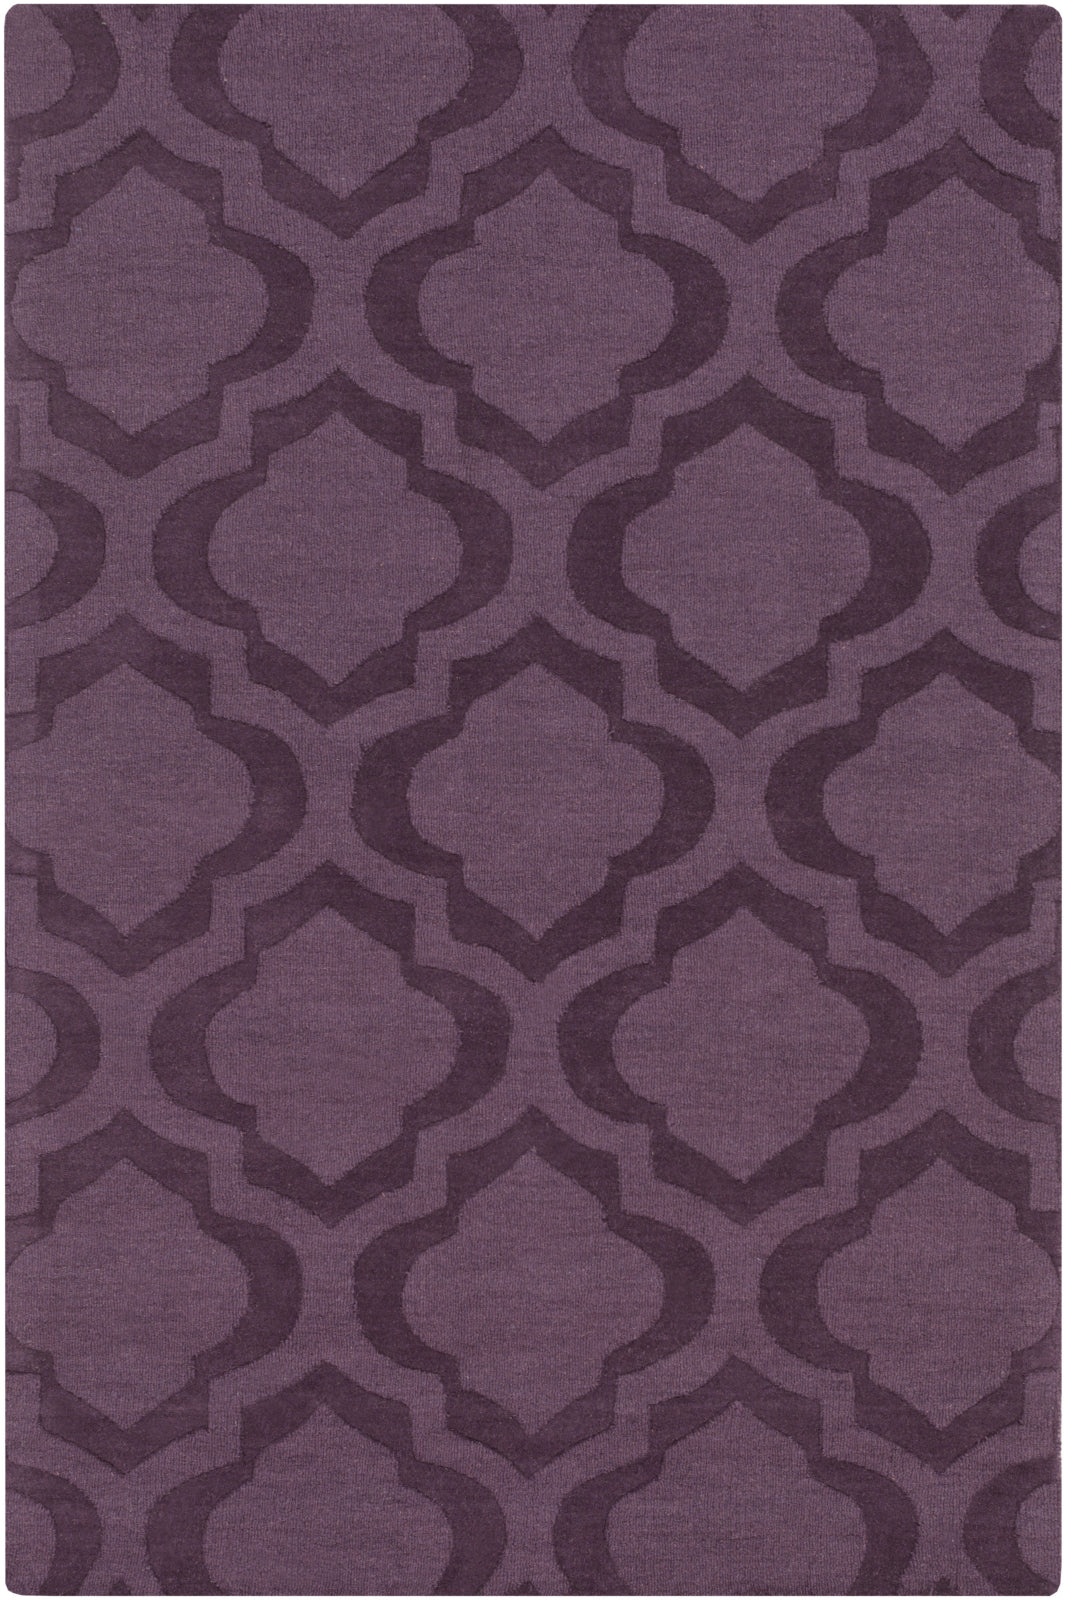 Artistic Weavers Central Park Kate AWHP4013 Area Rug main image